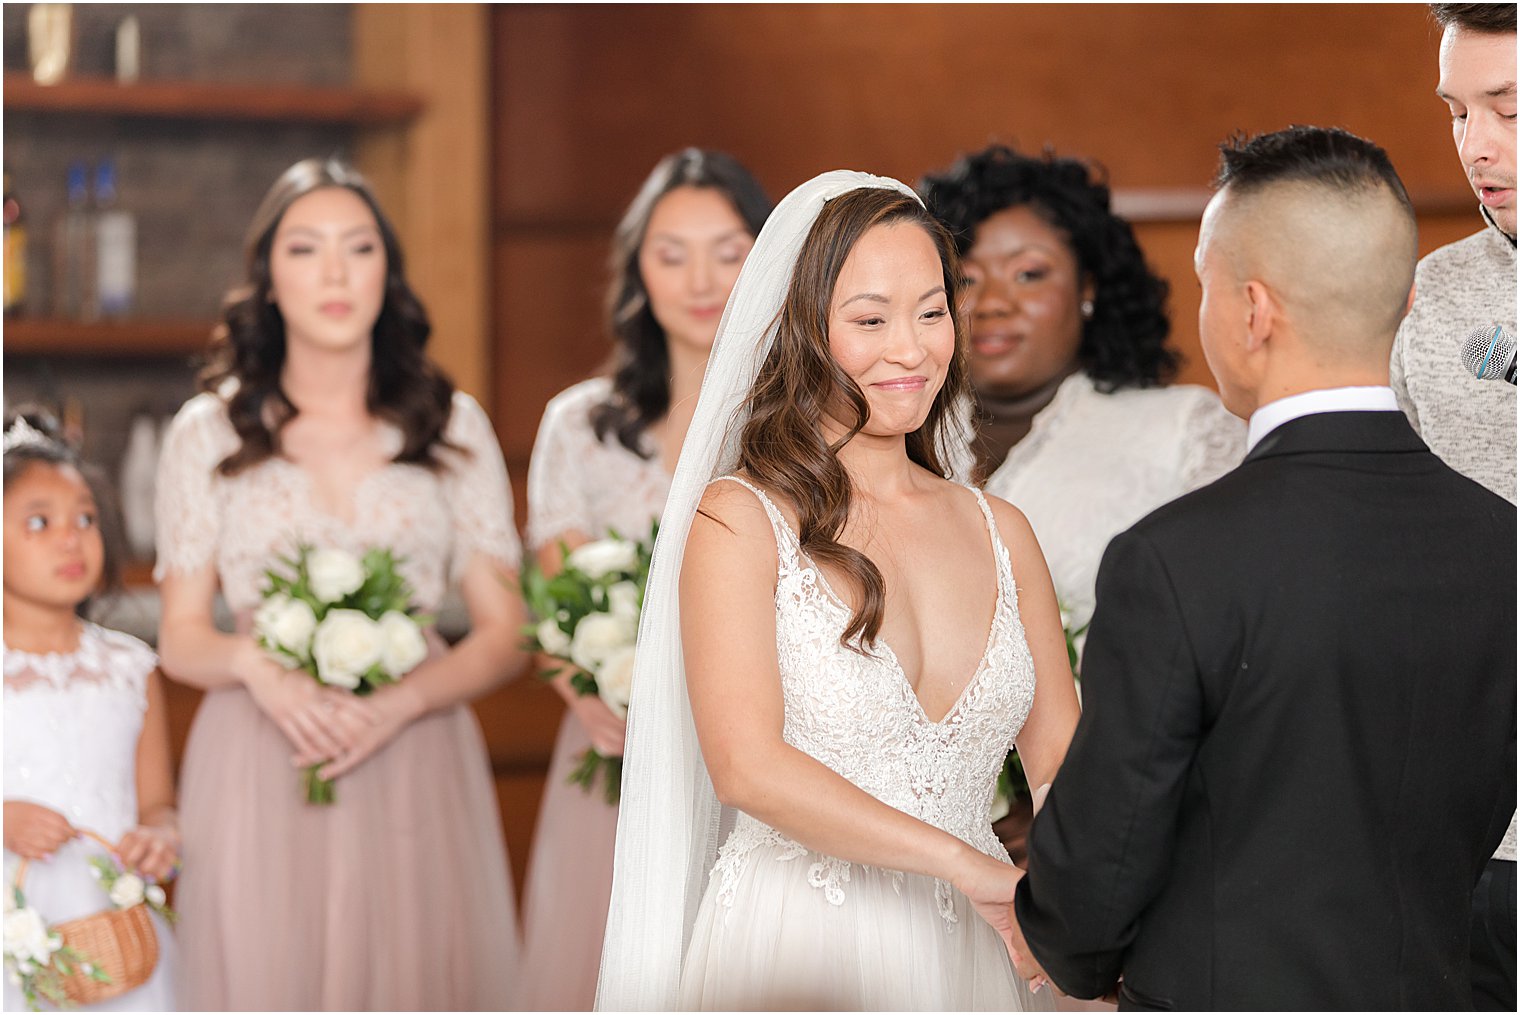 bride smiles during wedding ceremony in New Jersey